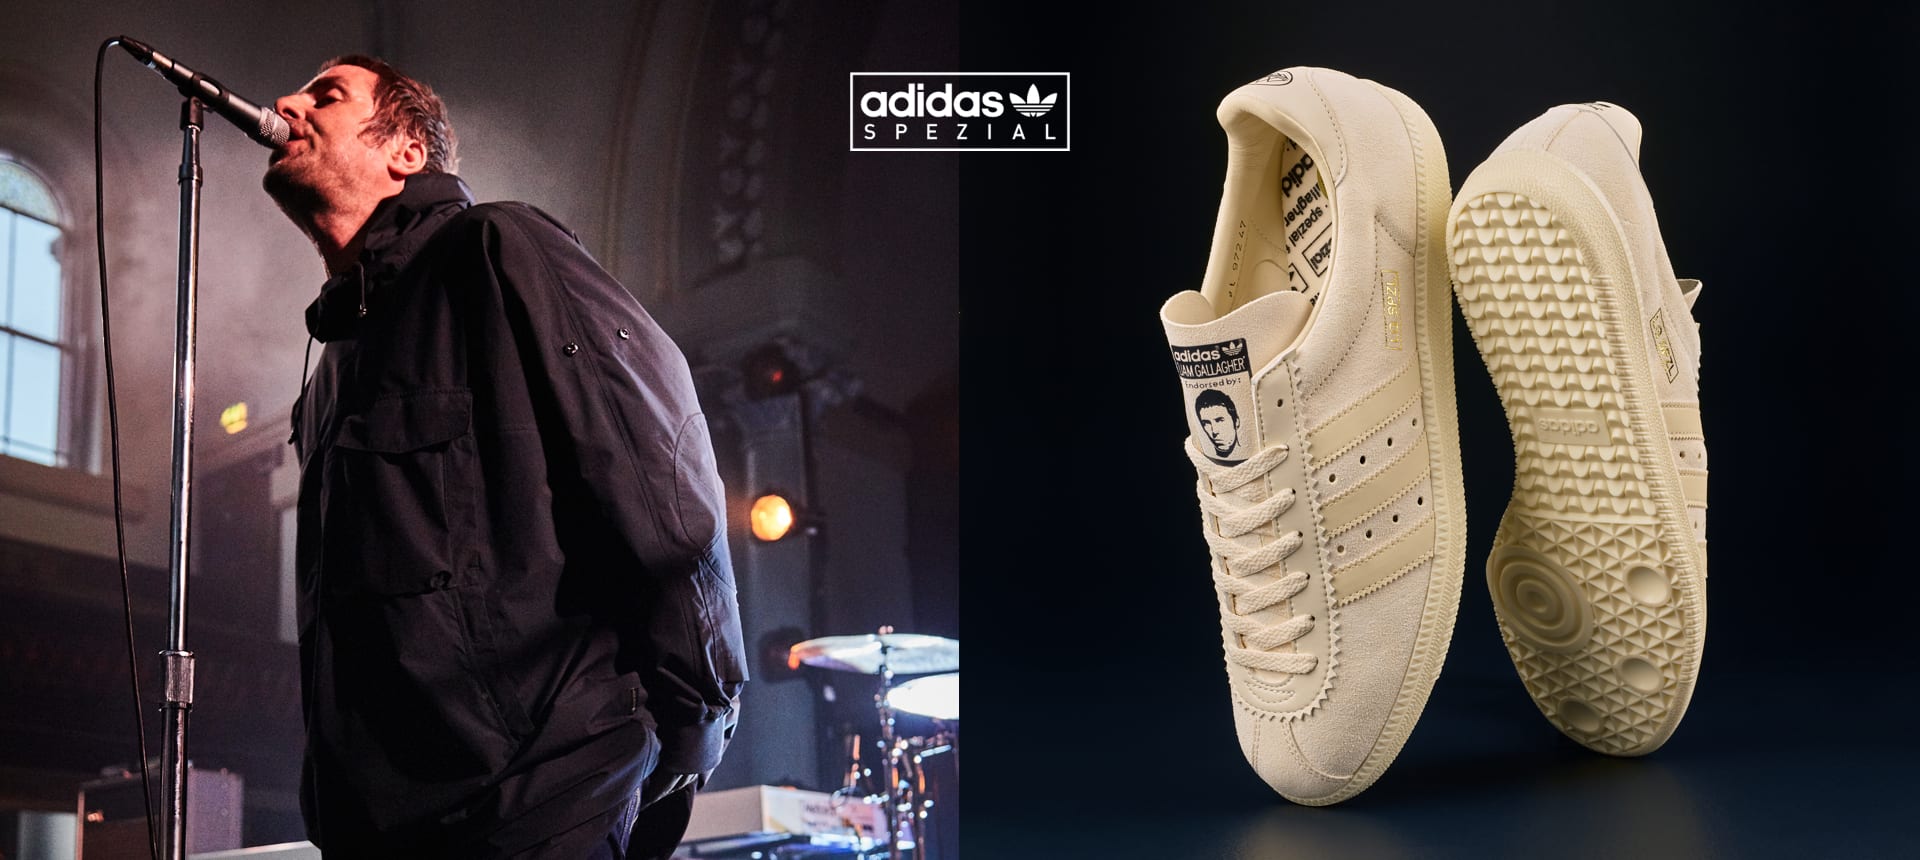 Liam Gallagher's New Adidas Sneakers